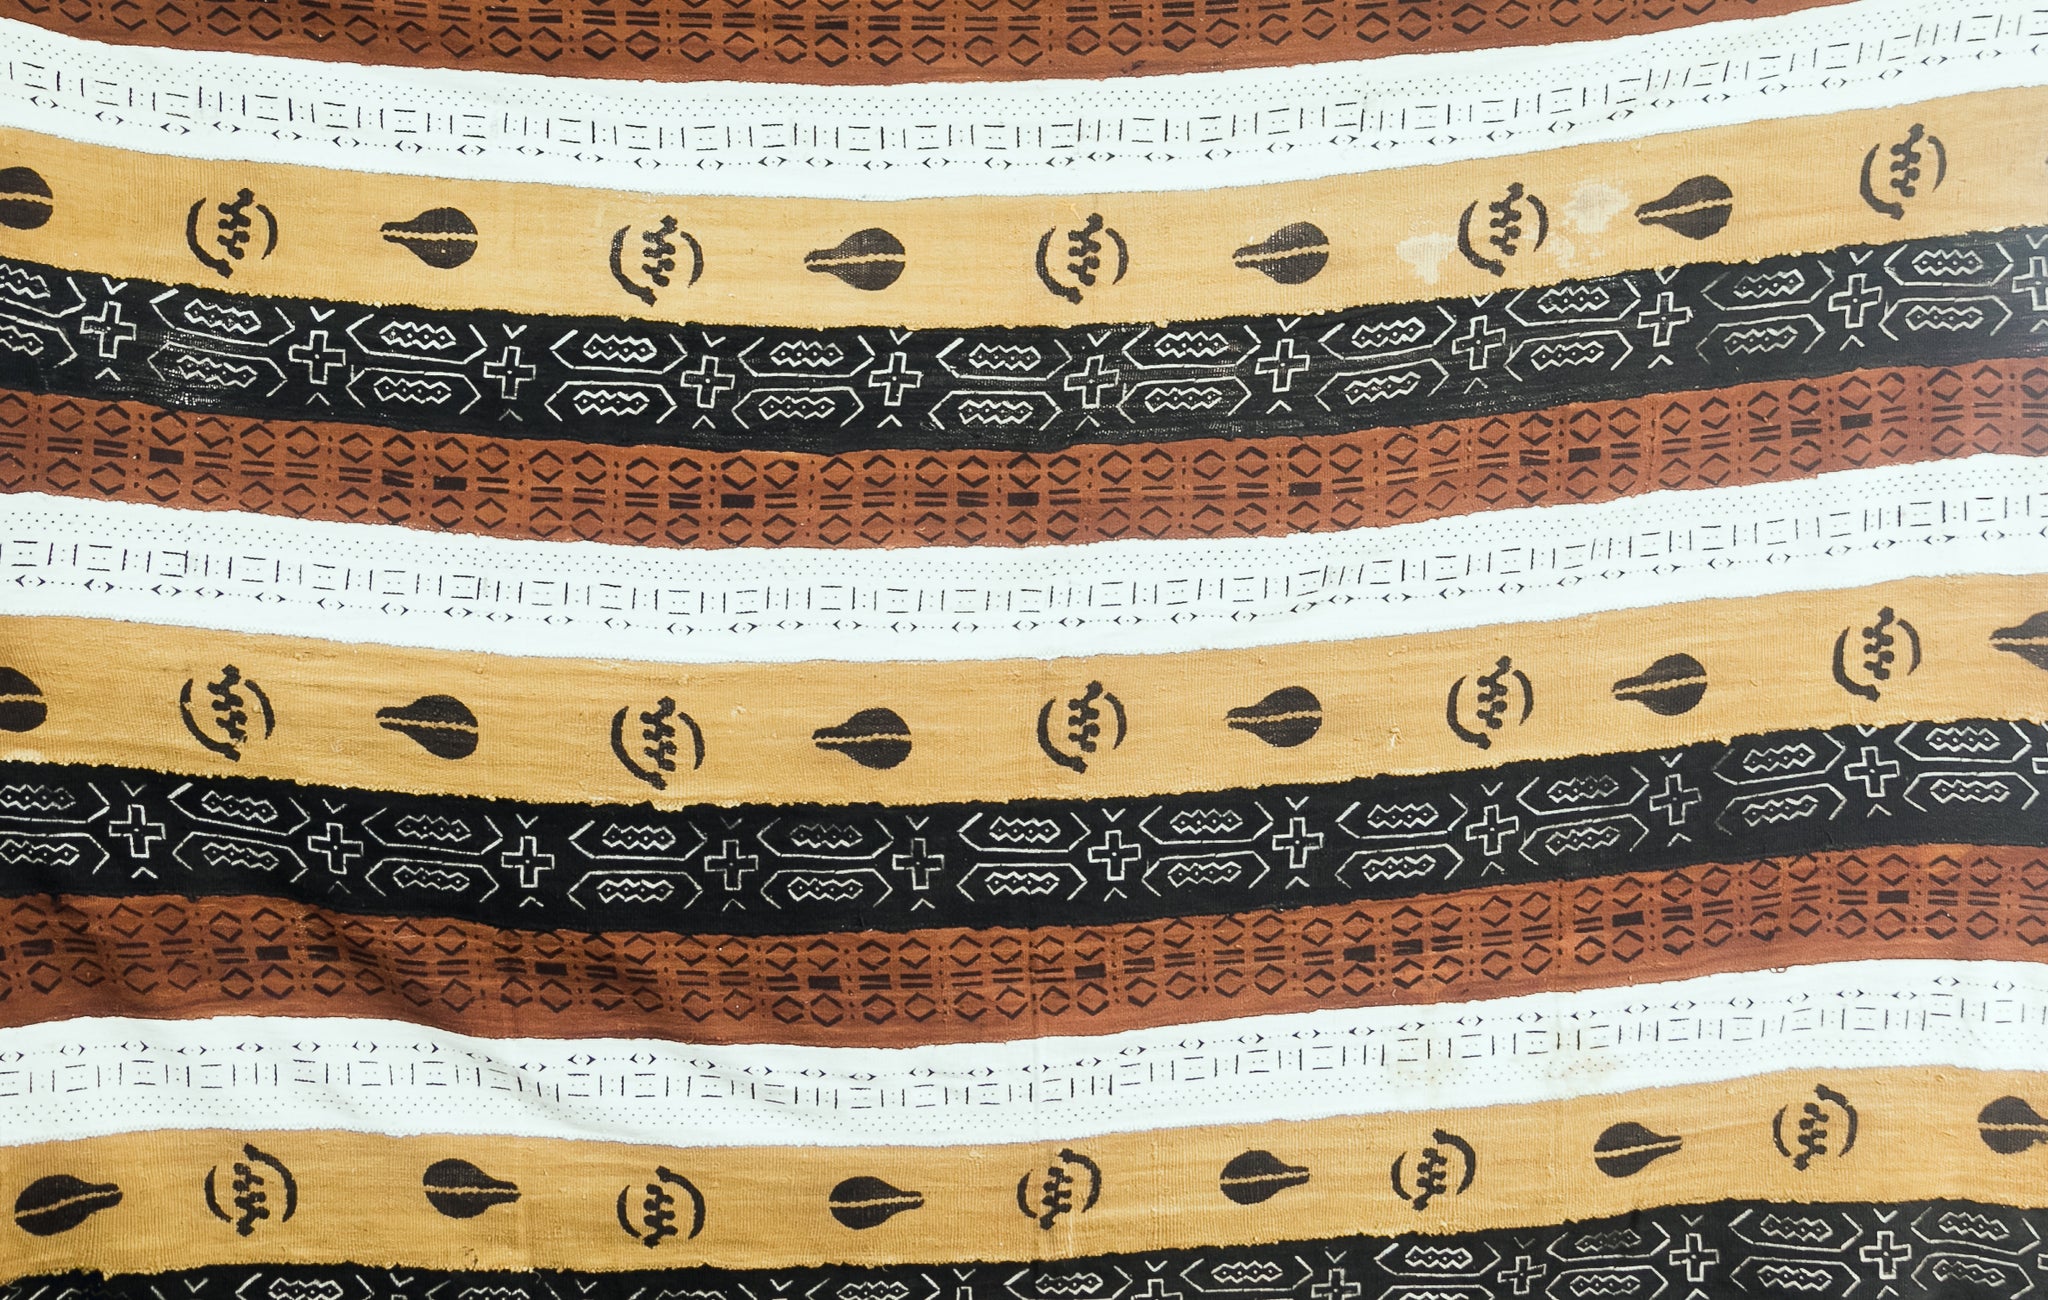 Mudcloth Blanket, ""Community" Pattern, traditional to nearby Mali, mudcloth is woven cotton fabric soaked in boiled leaves from the n'gallama tree and painted with clay and mud, Ghana, West Africa 253 cm X 186 cm